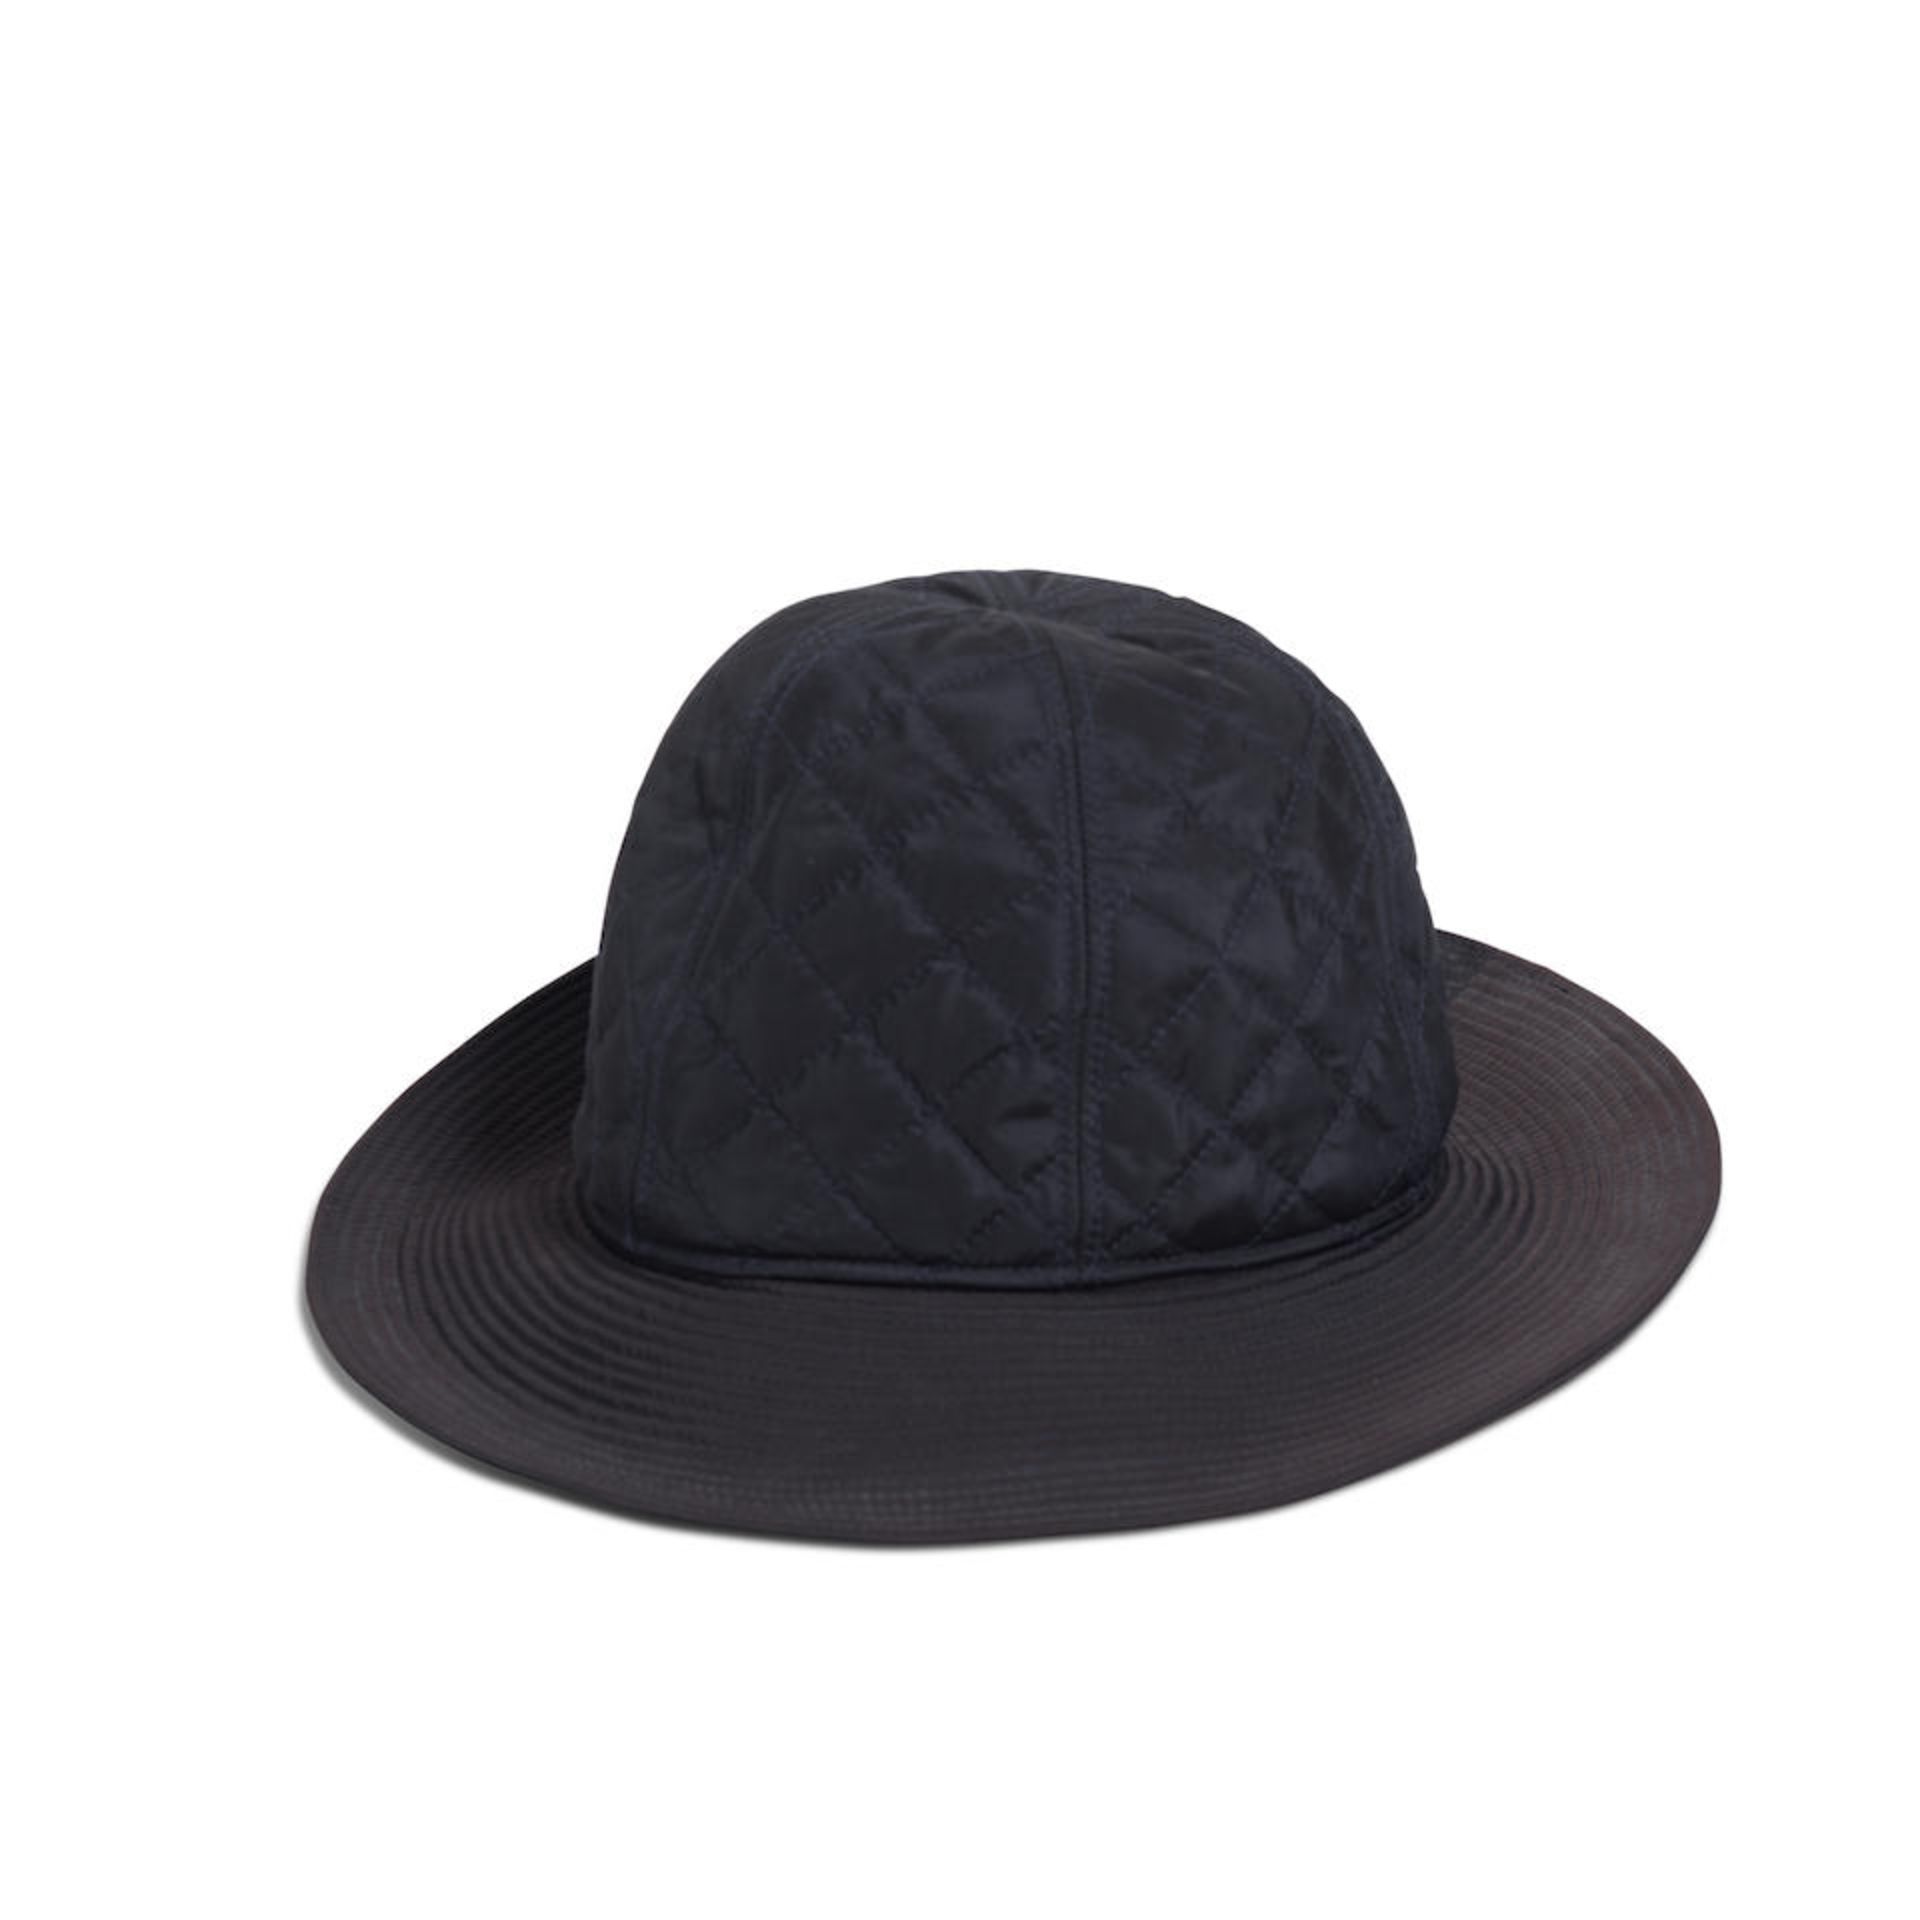 CHANEL: QUILTED BUCKET HAT 1990's